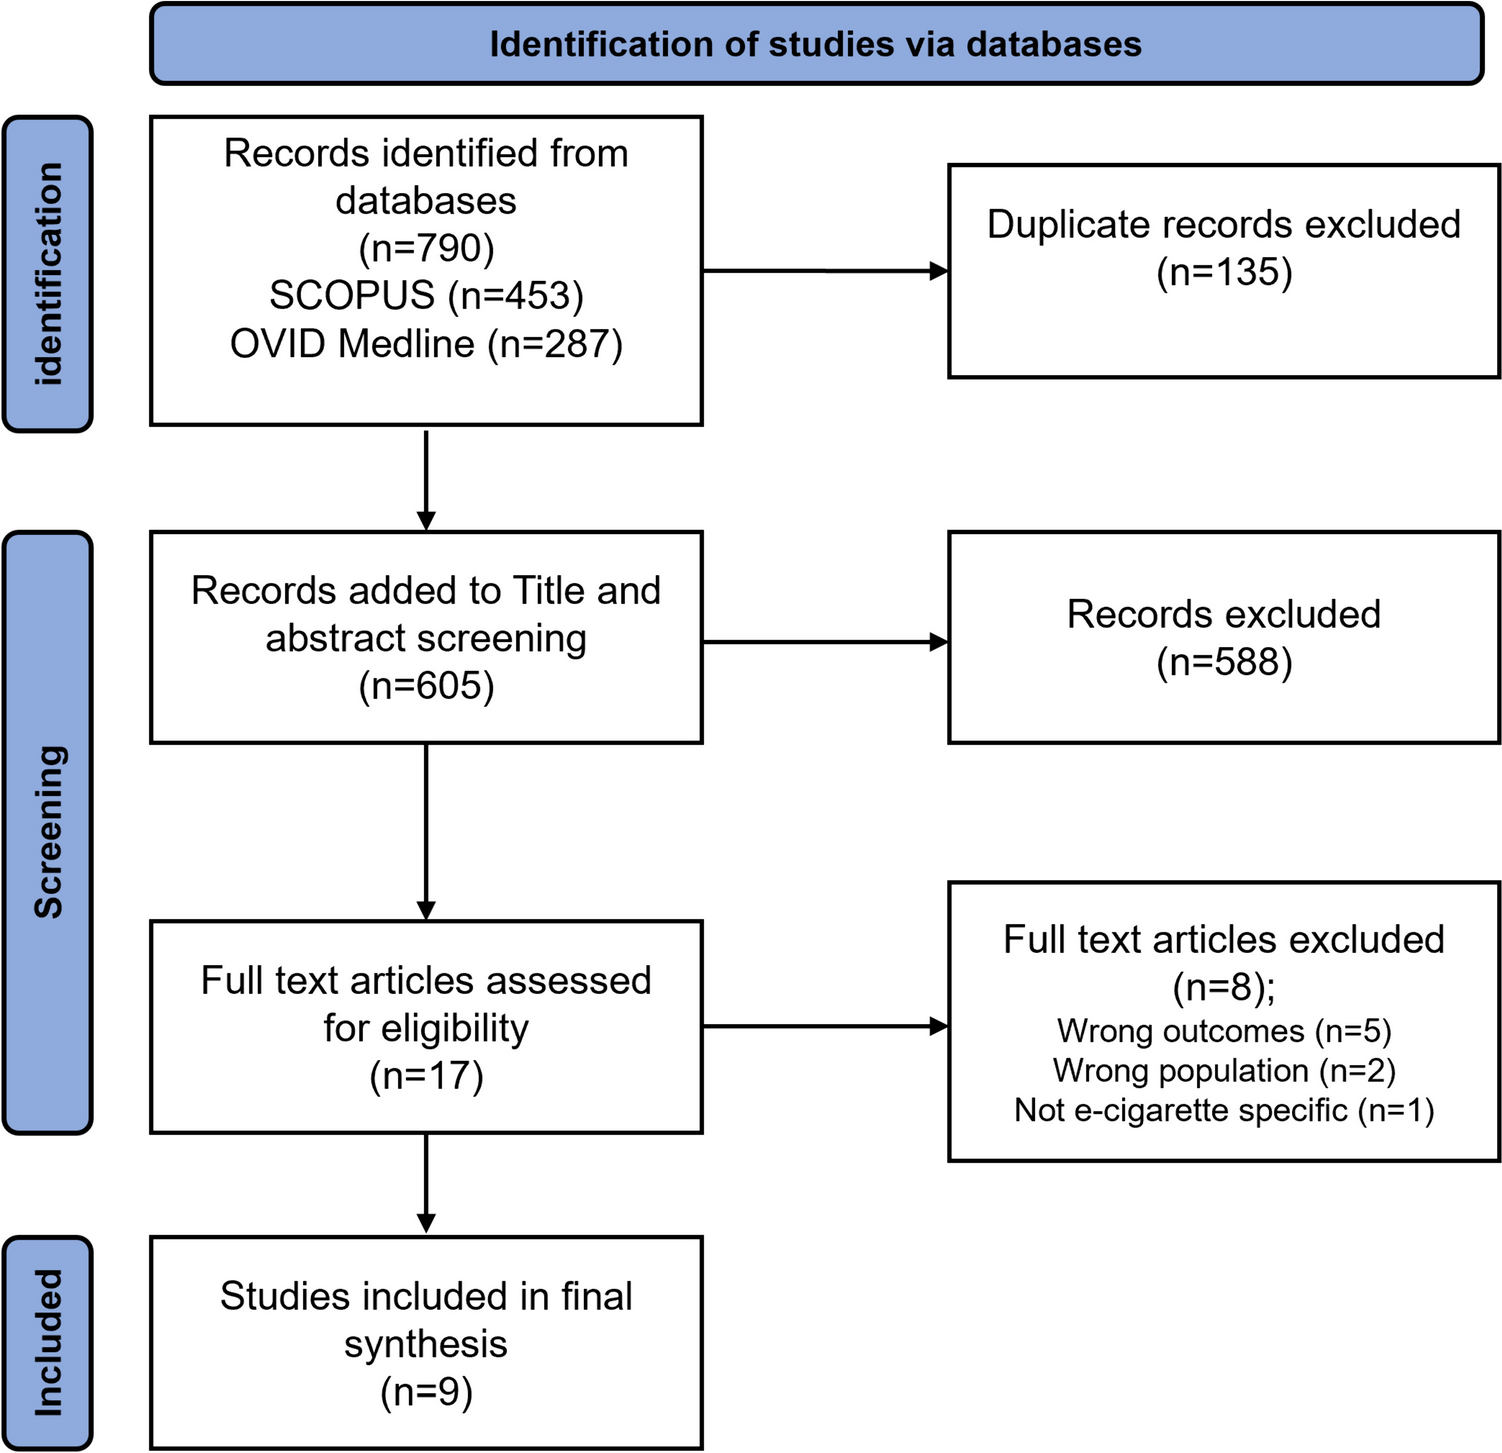 Attitudes of people diagnosed with cancer and cancer care providers towards use of nicotine vaping products in high-income countries: a scoping review